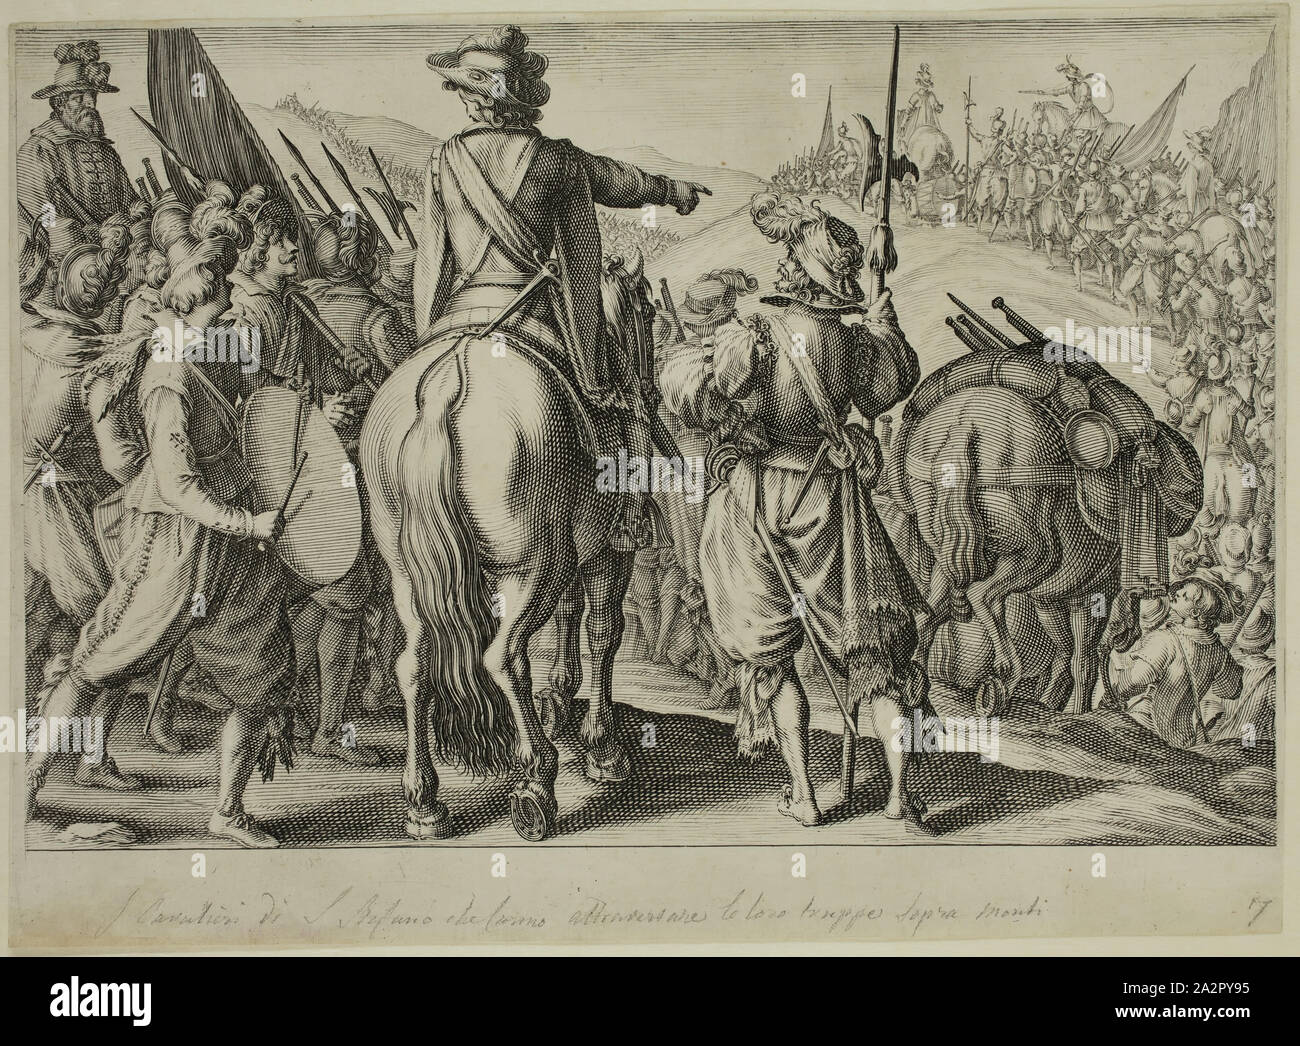 Jacques Callot, French, 1592-1635, after Matteo Rosselli, Italian, 1578-1650, Les troupes en marche, between 1615 and 1619, engraving printed in black ink on laid paper, Sheet (trimmed within plate mark): 8 1/2 × 11 3/4 inches (21.6 × 29.8 cm Stock Photo